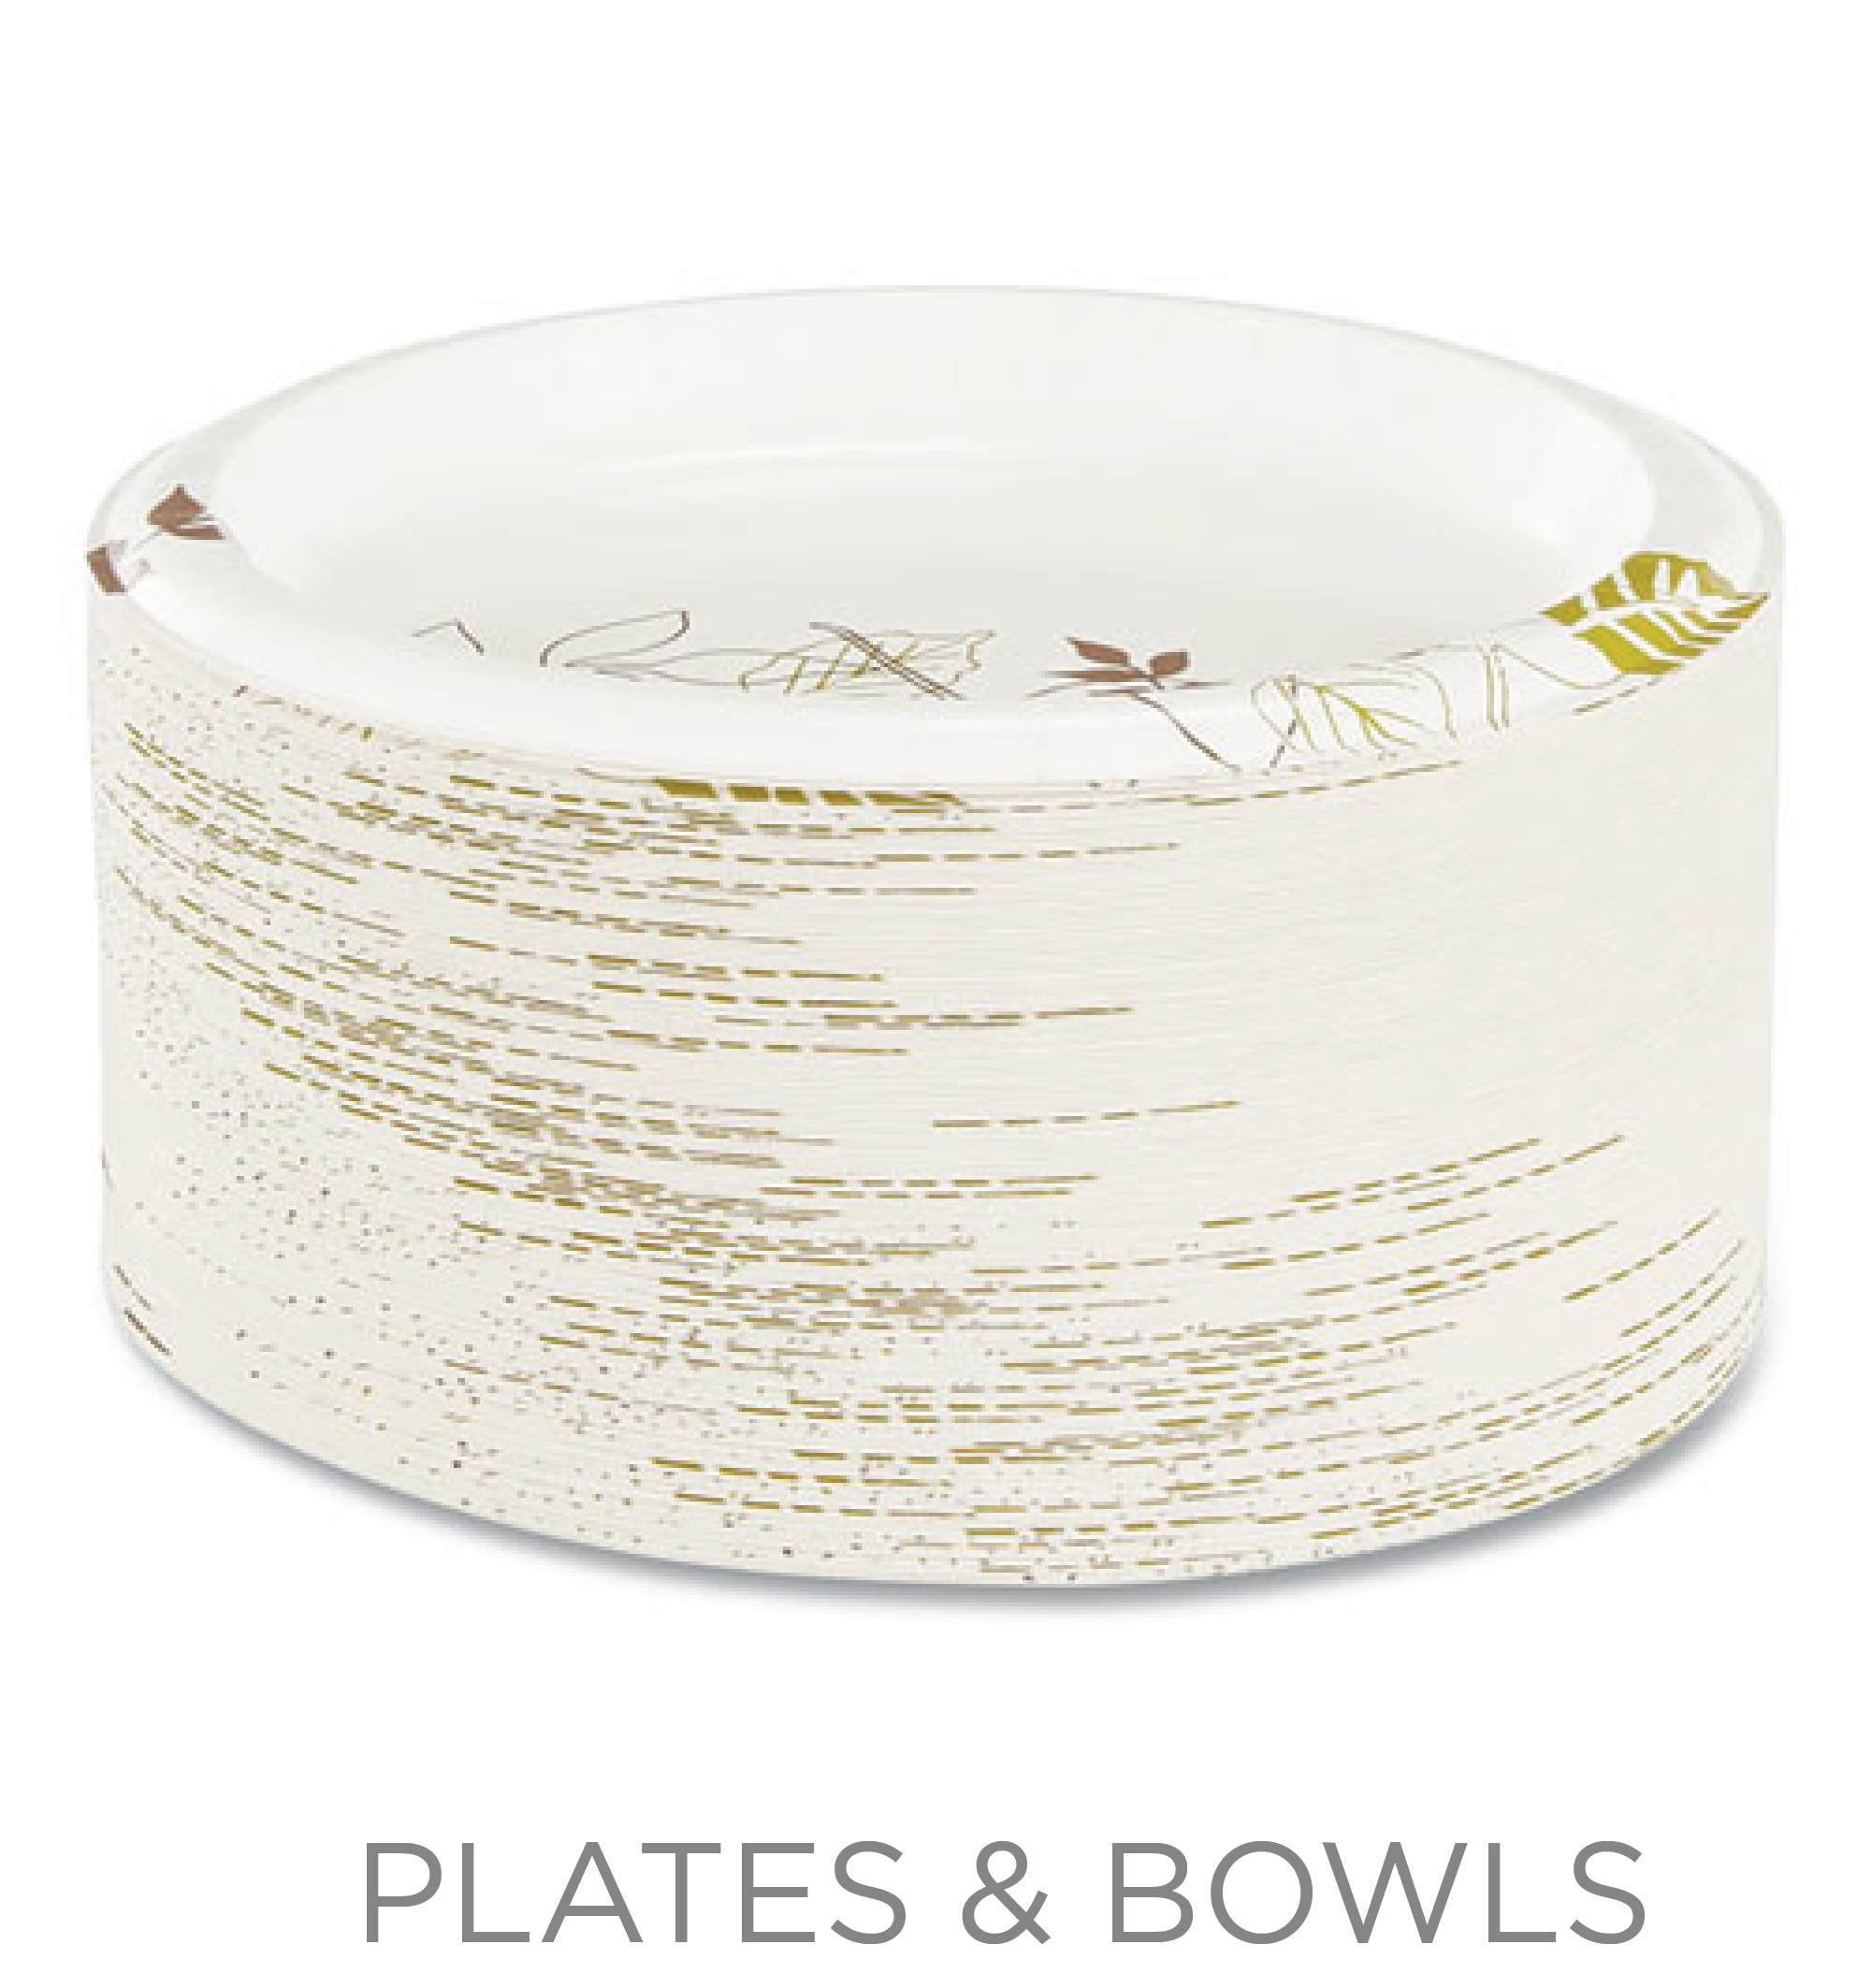 Plates & Bowls - Preparing for the Holidays